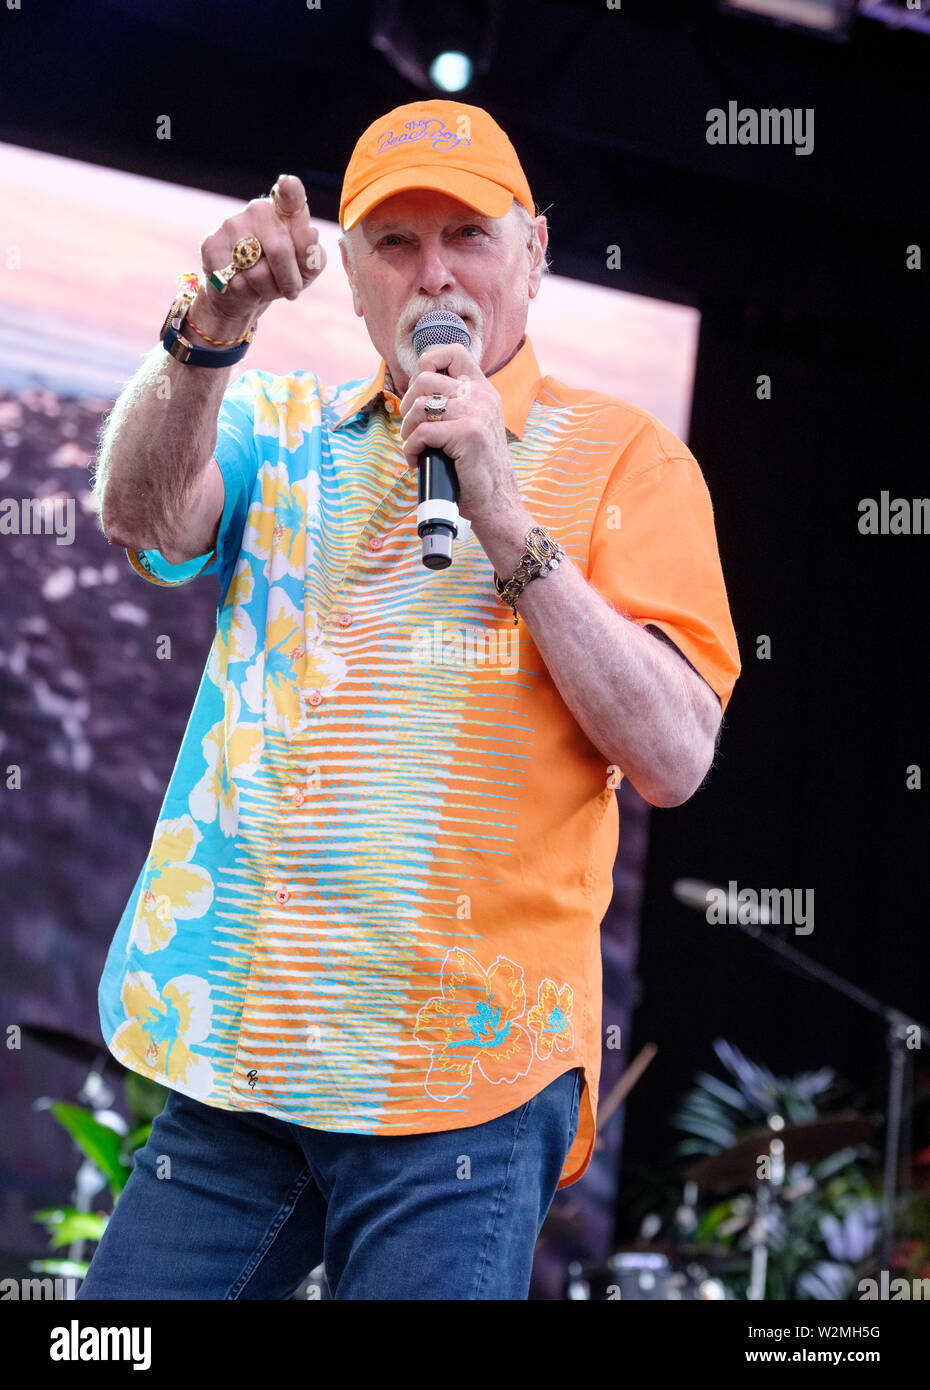 Mike Love of The Beach Boys performing at The Cornbury Music Festival, Oxford, UK. July 7, 2019 Stock Photo